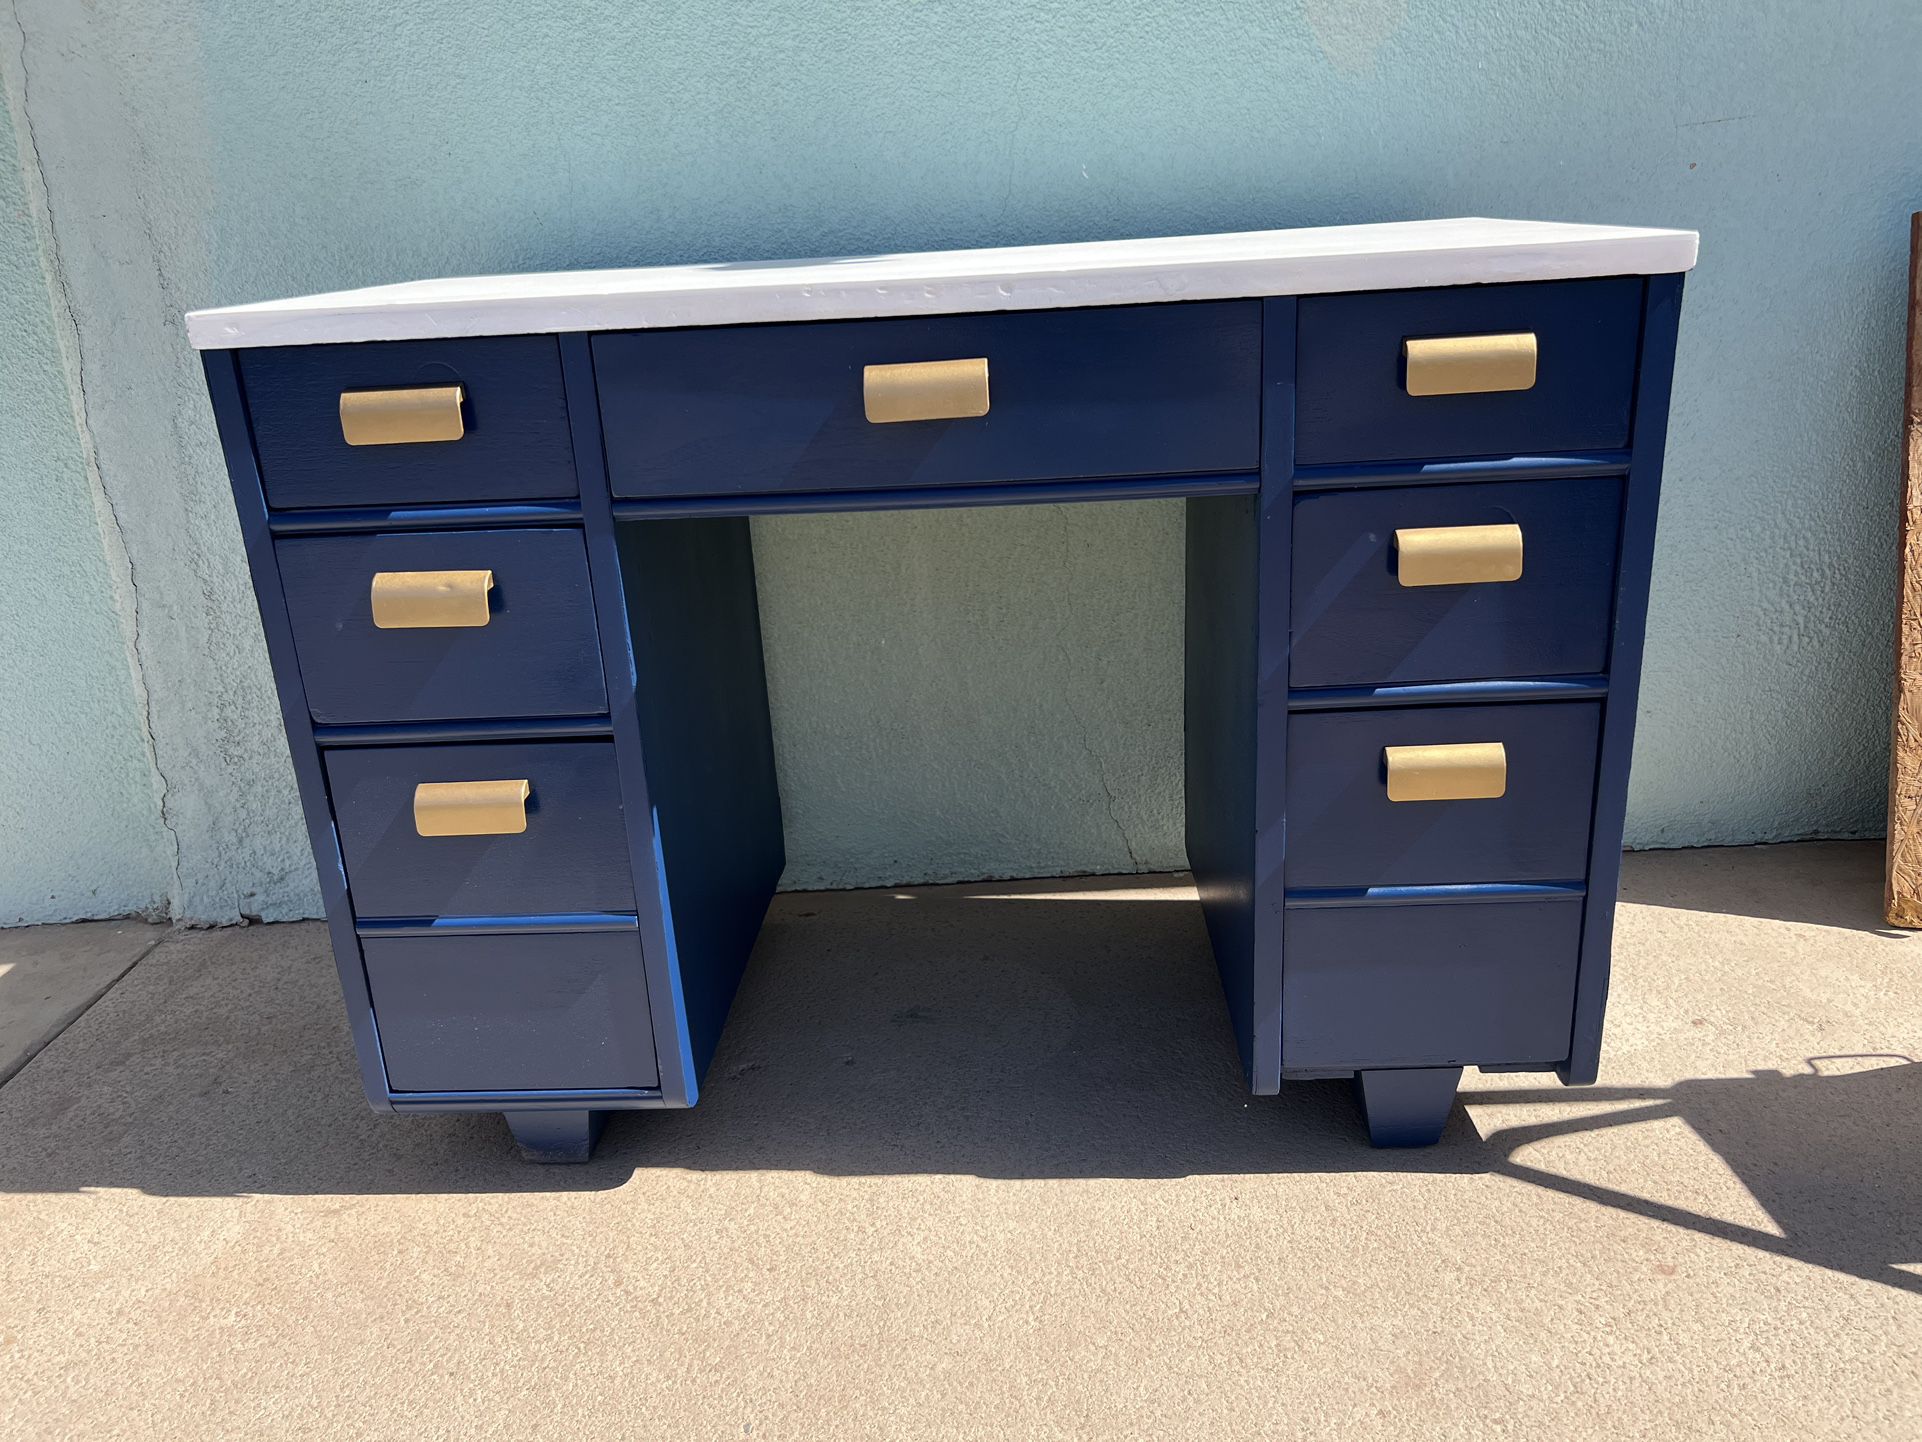 Adorable Refurbished White Top With Blue Desk And Good Handles